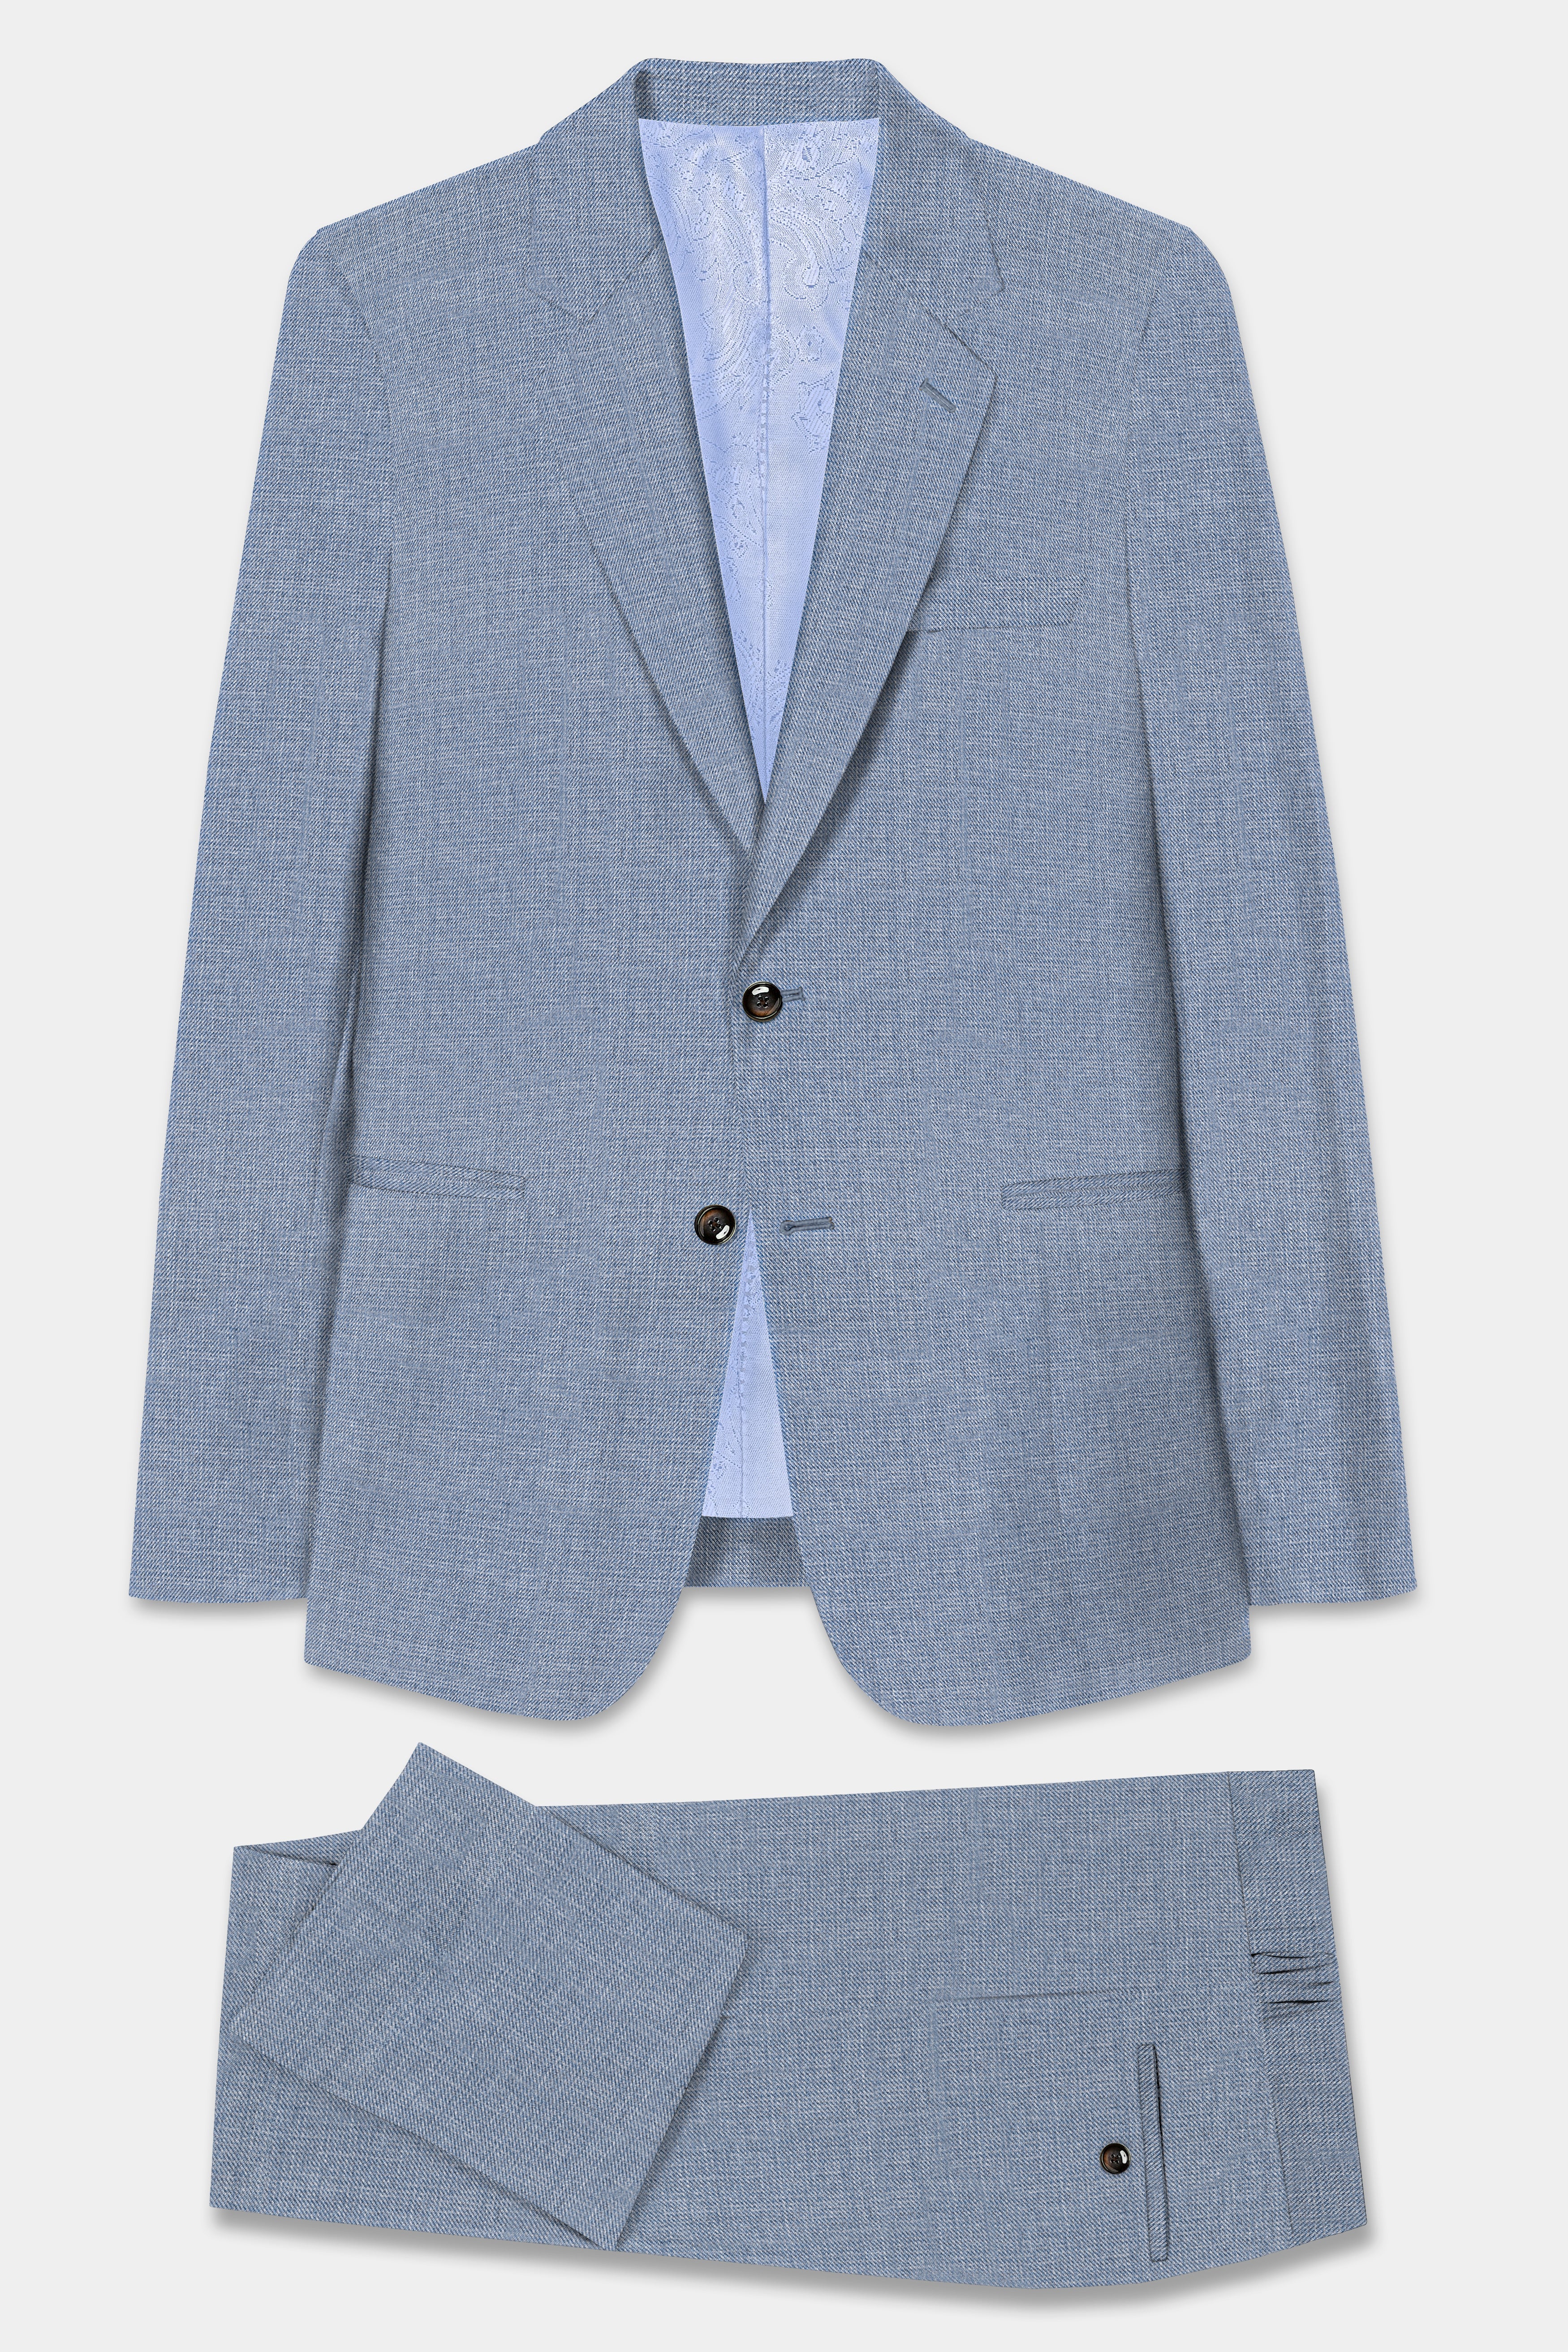 Bluish Wool Rich Single Breasted Suit